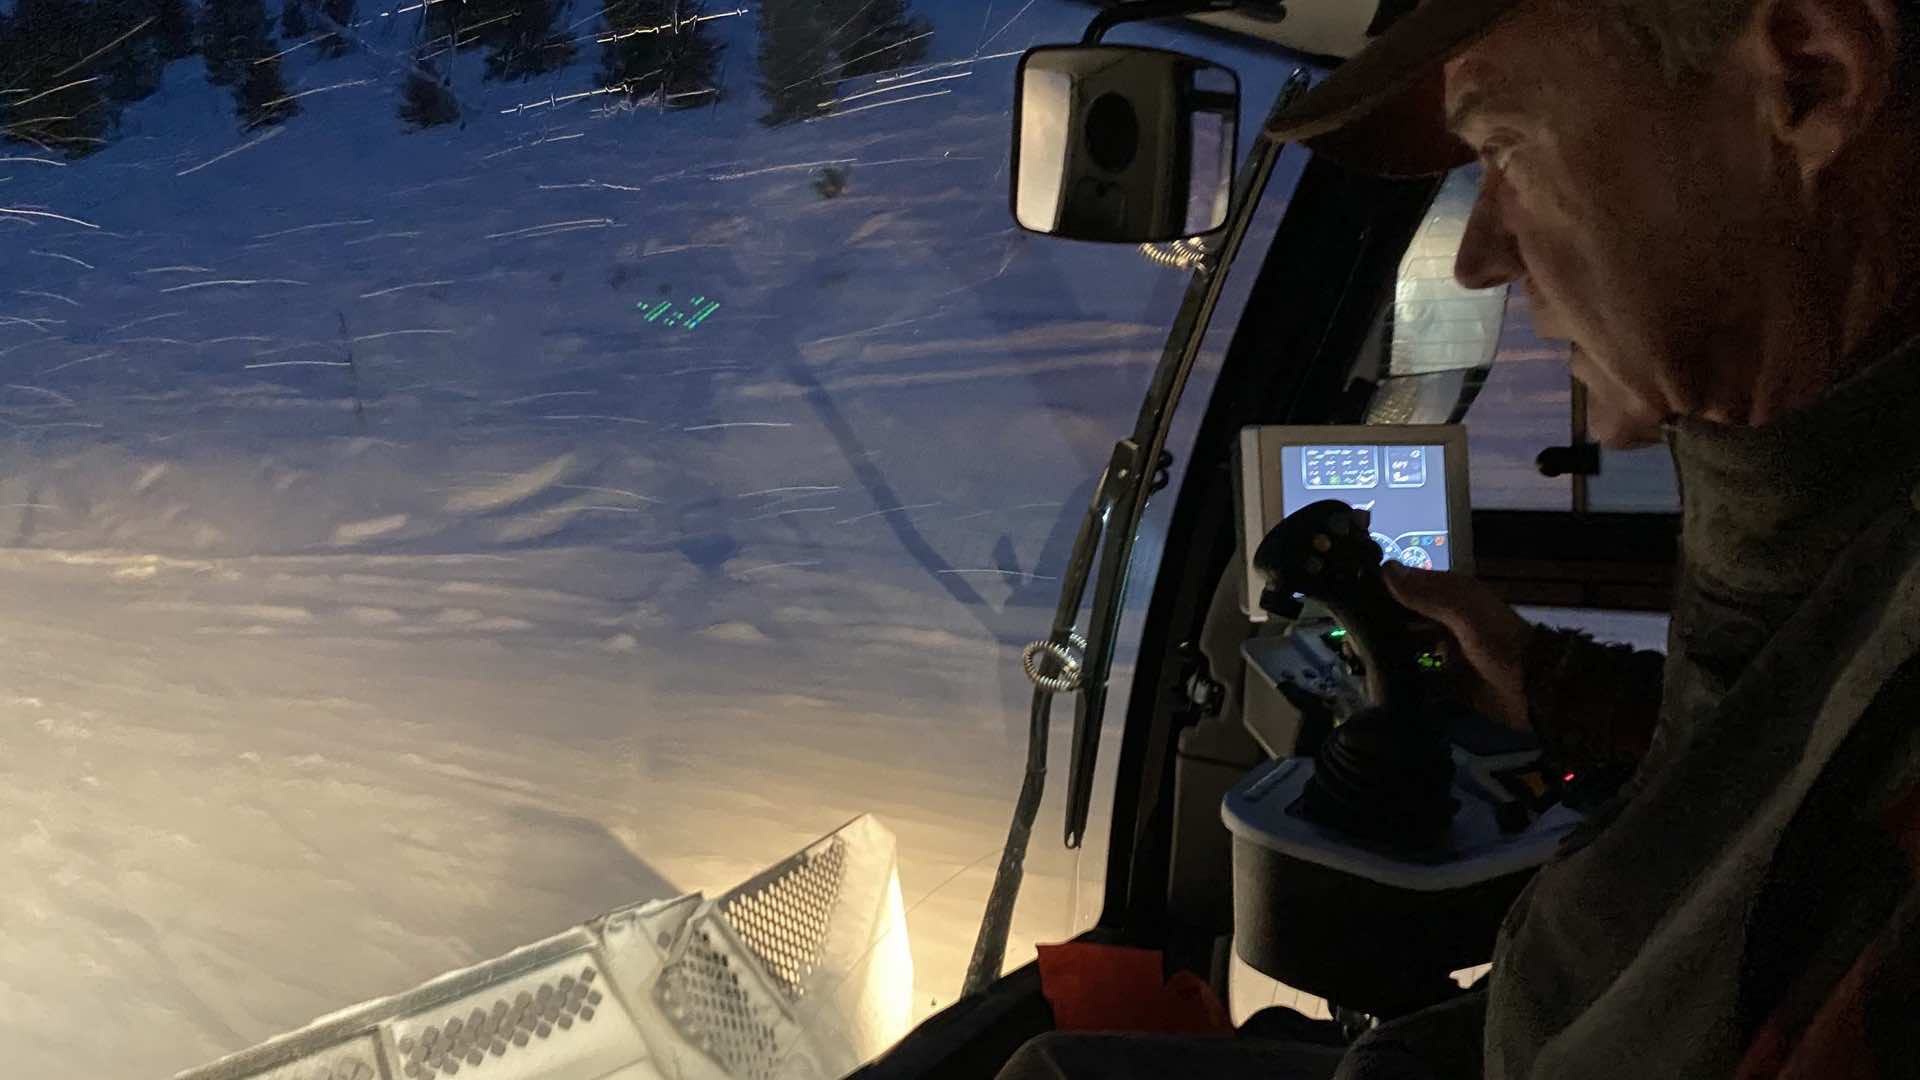 View from the inside of a snowcat at night